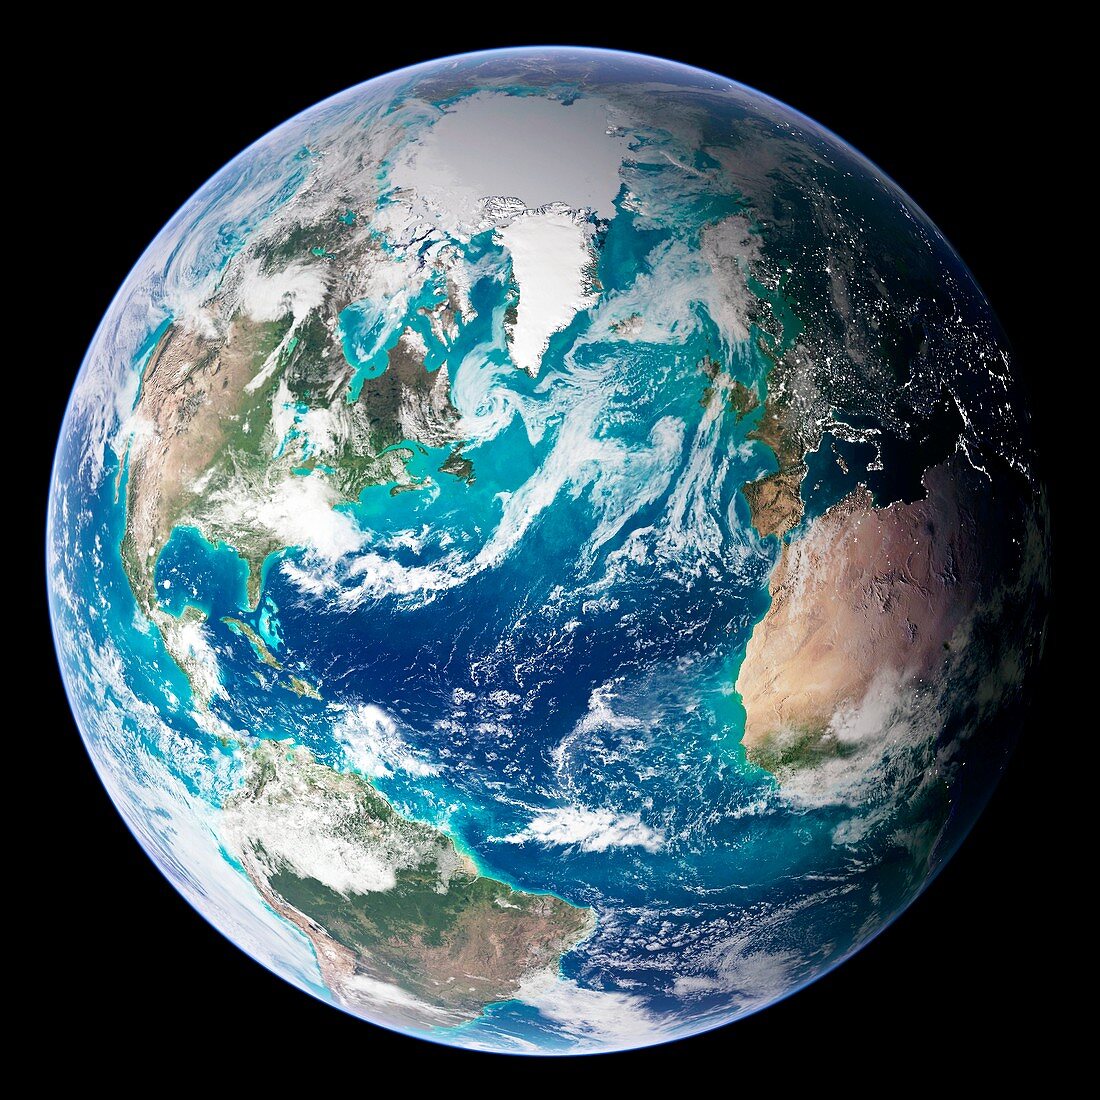 Blue Marble image of Earth (2005)